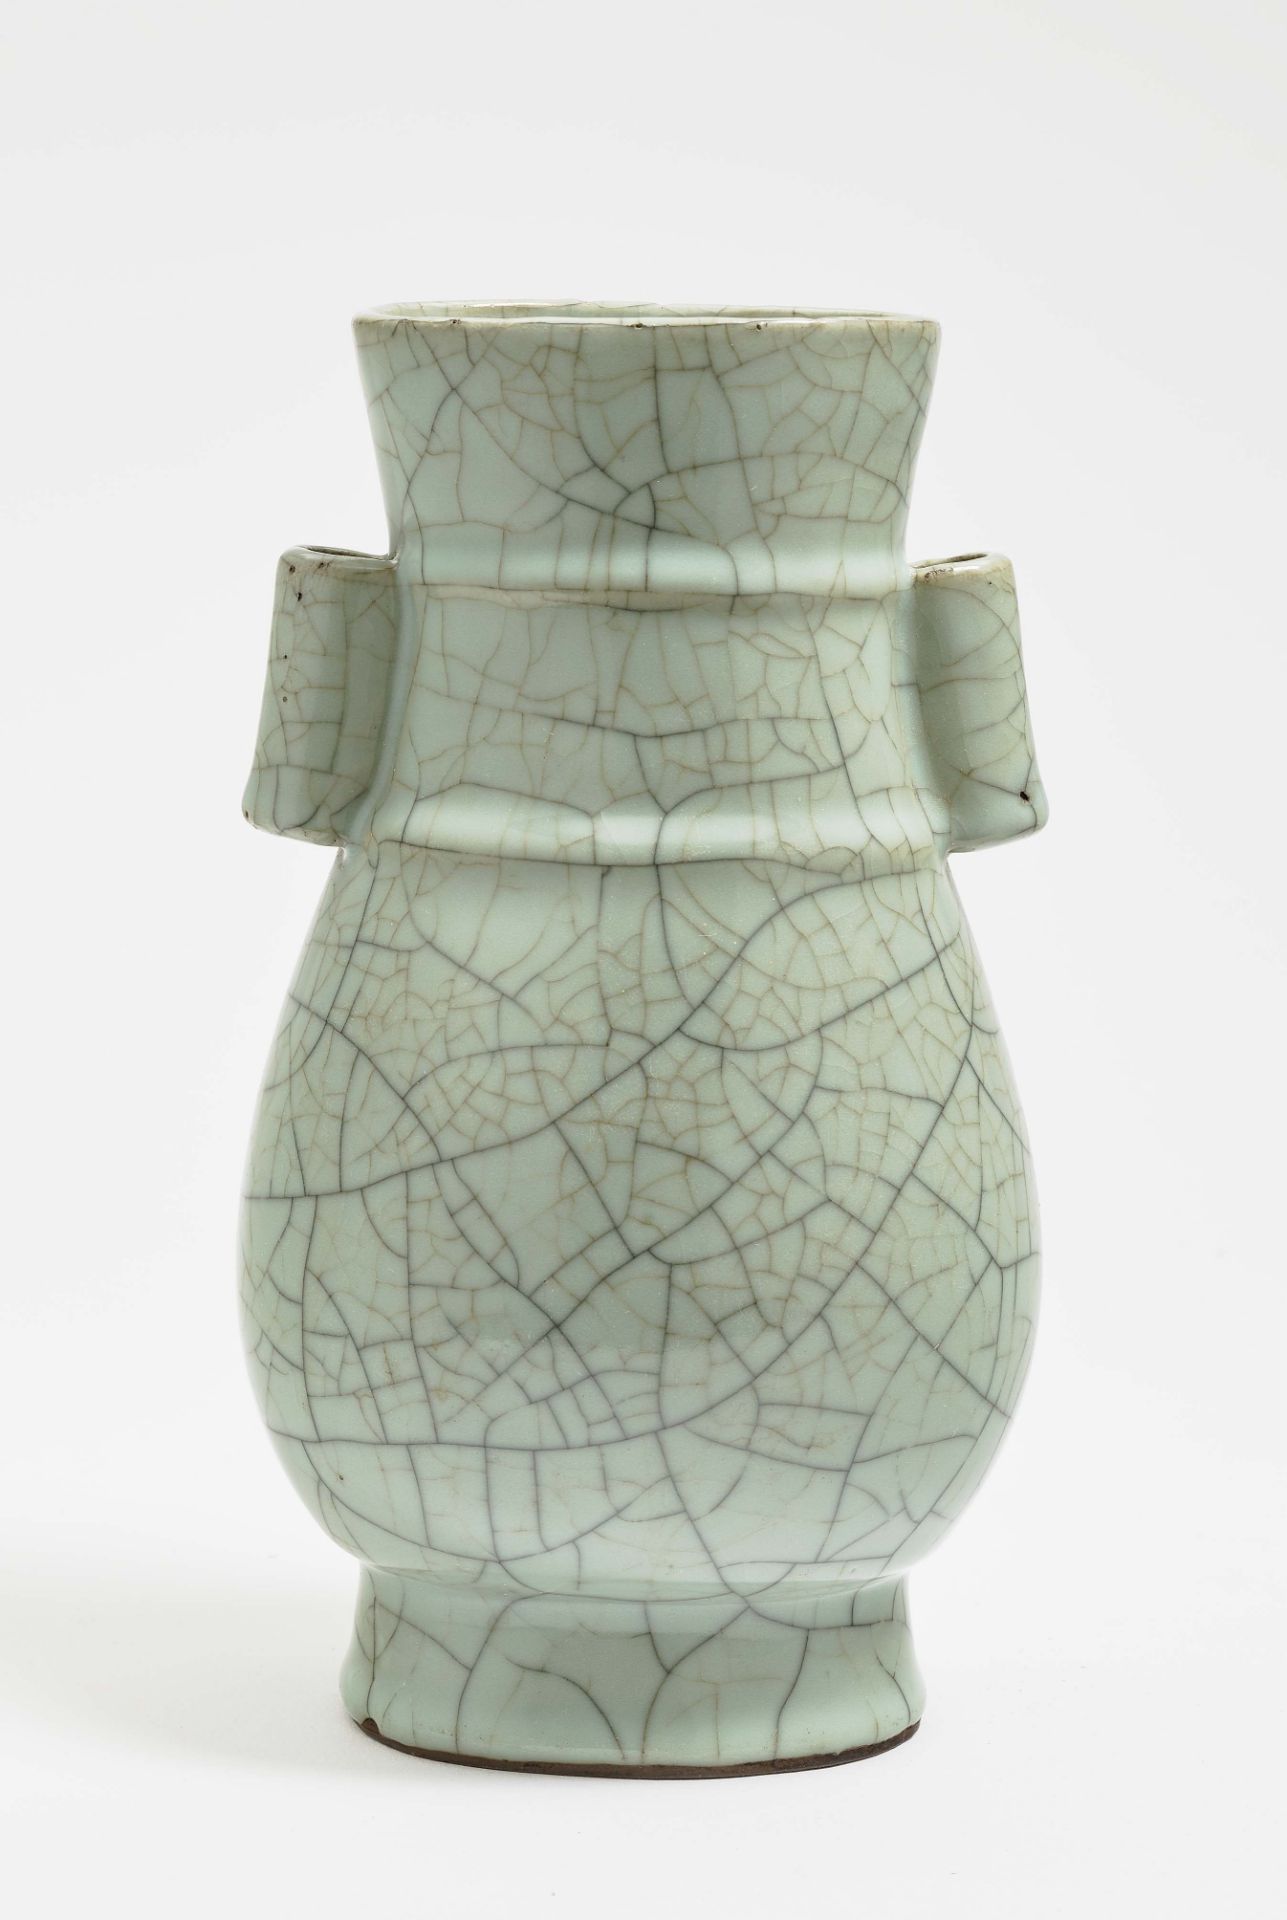 A ''Ge-type'' Hu-form vaseChina, probably 18th/19th century Porcelain. Celadon glaze with craquelure